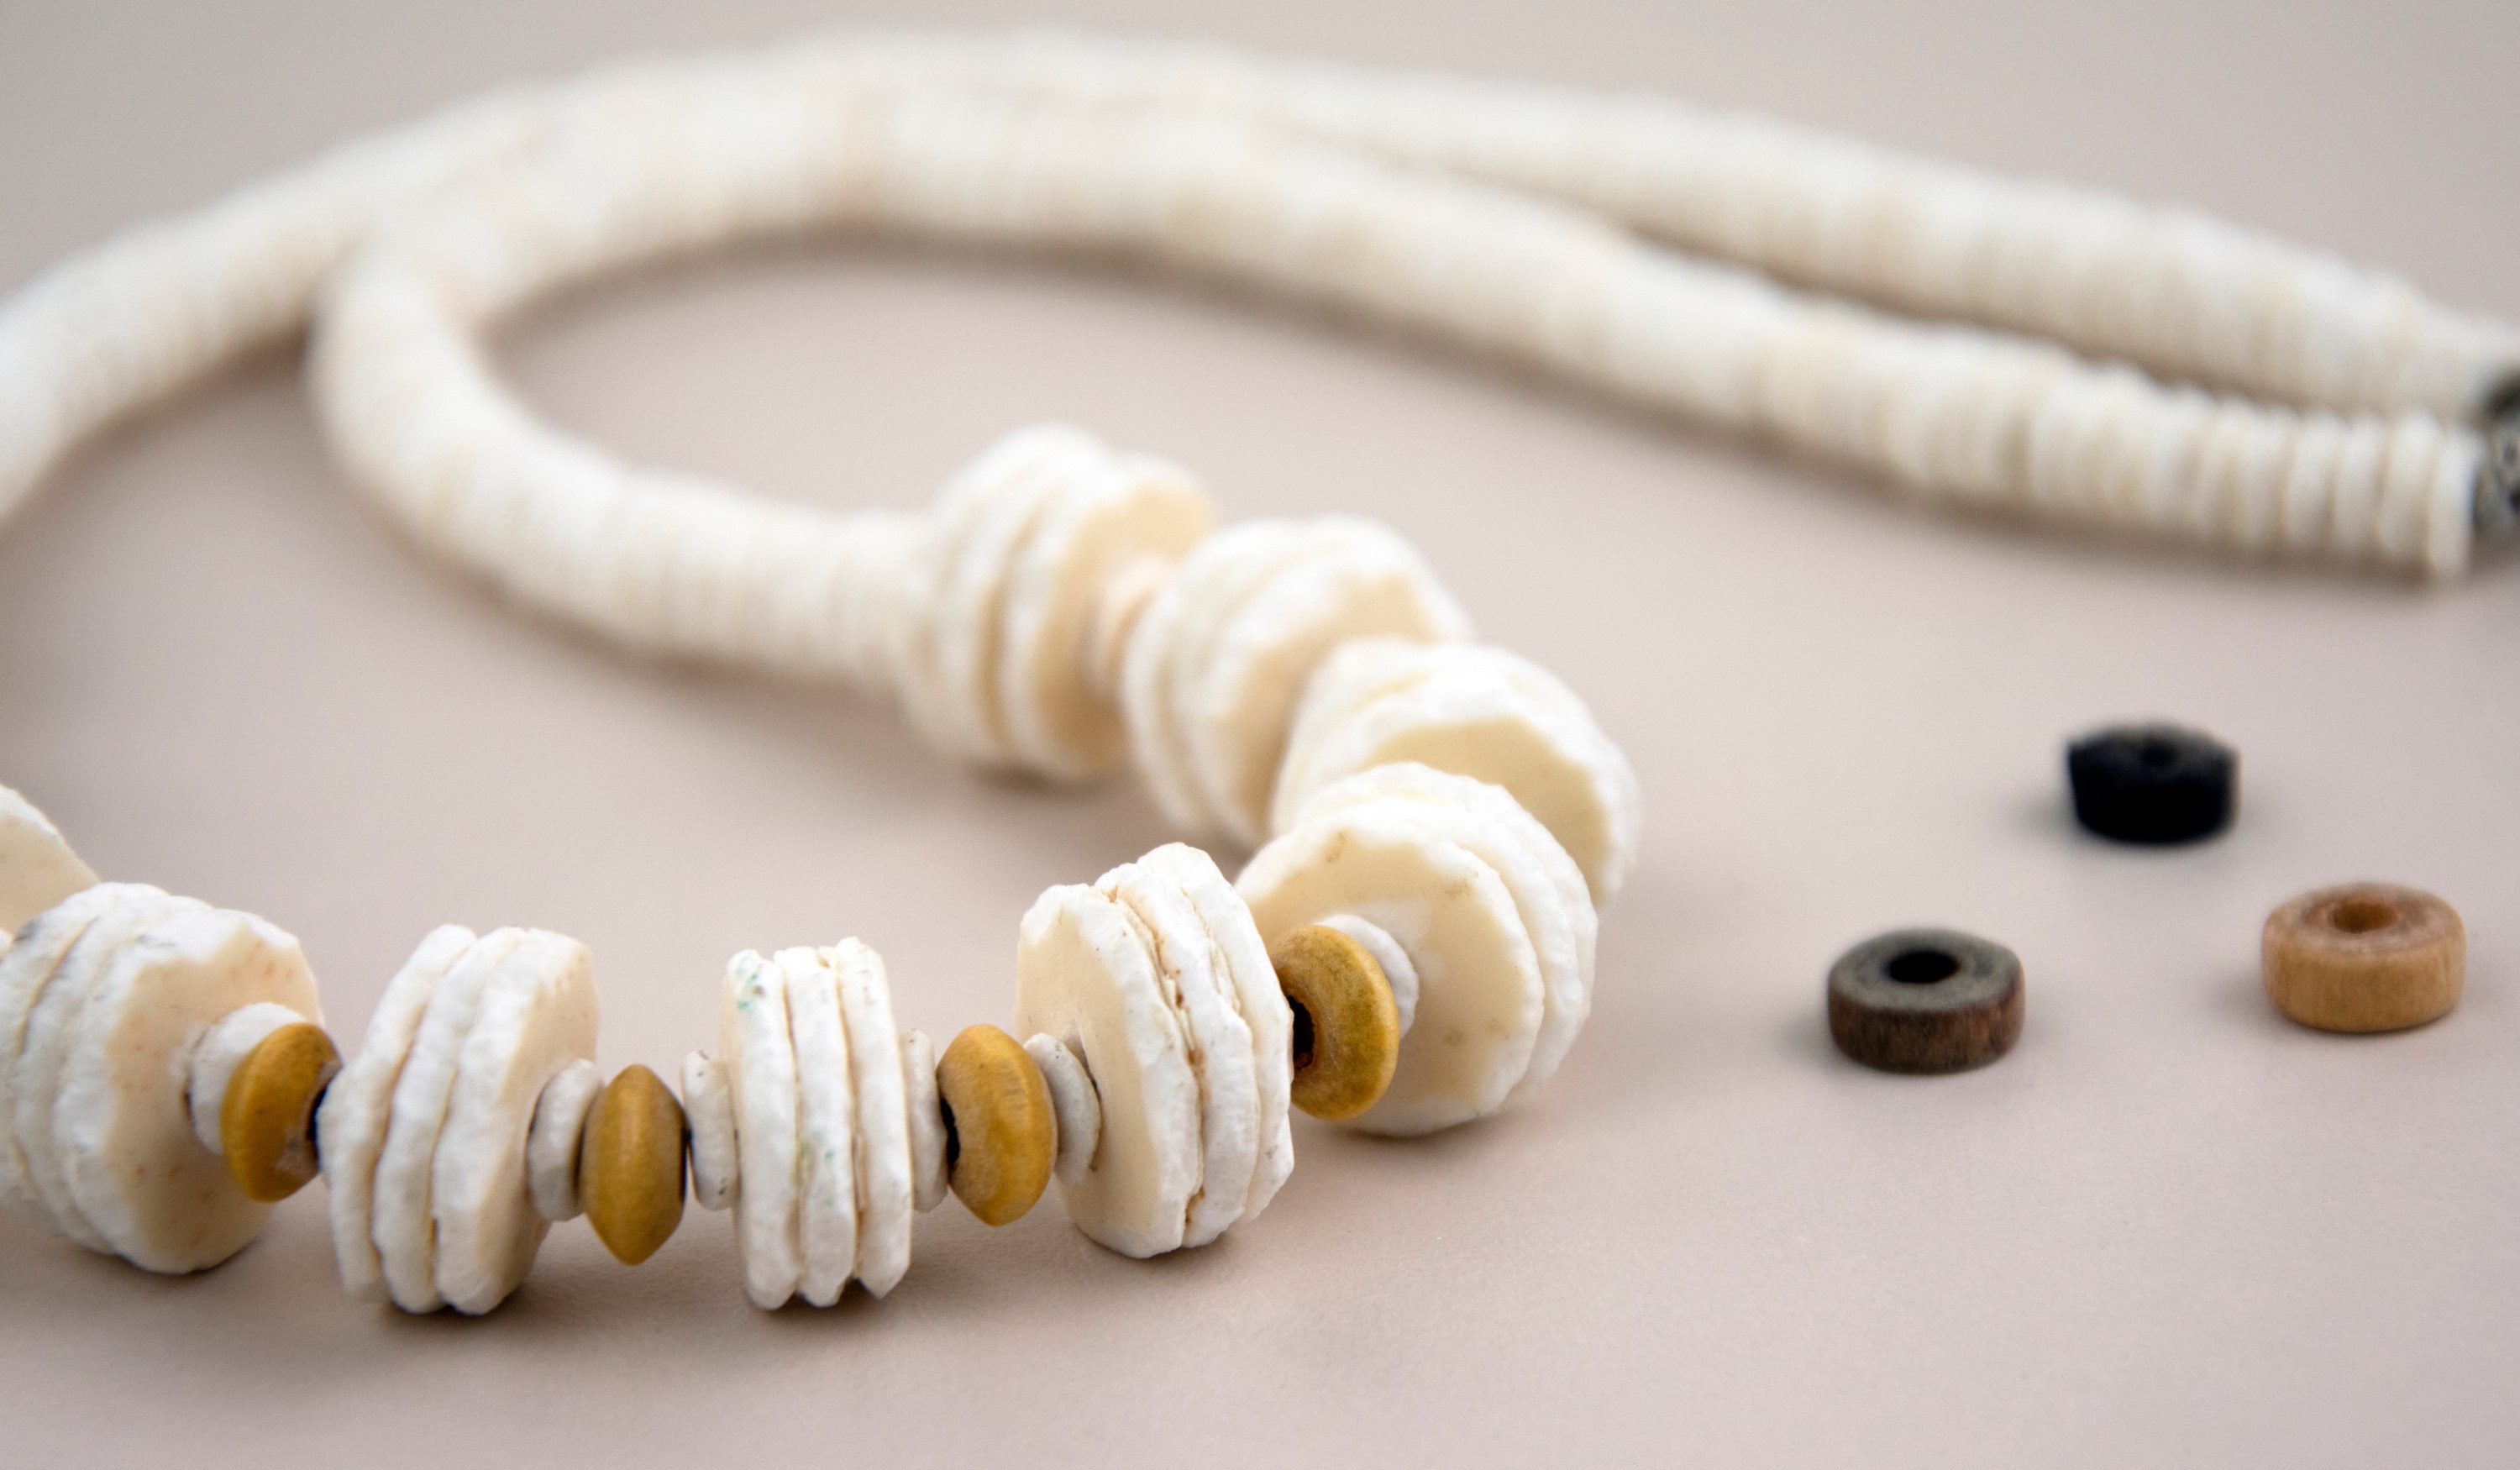 A necklace fashioned using ostrich eggshell beads (Photo: Getty Images)